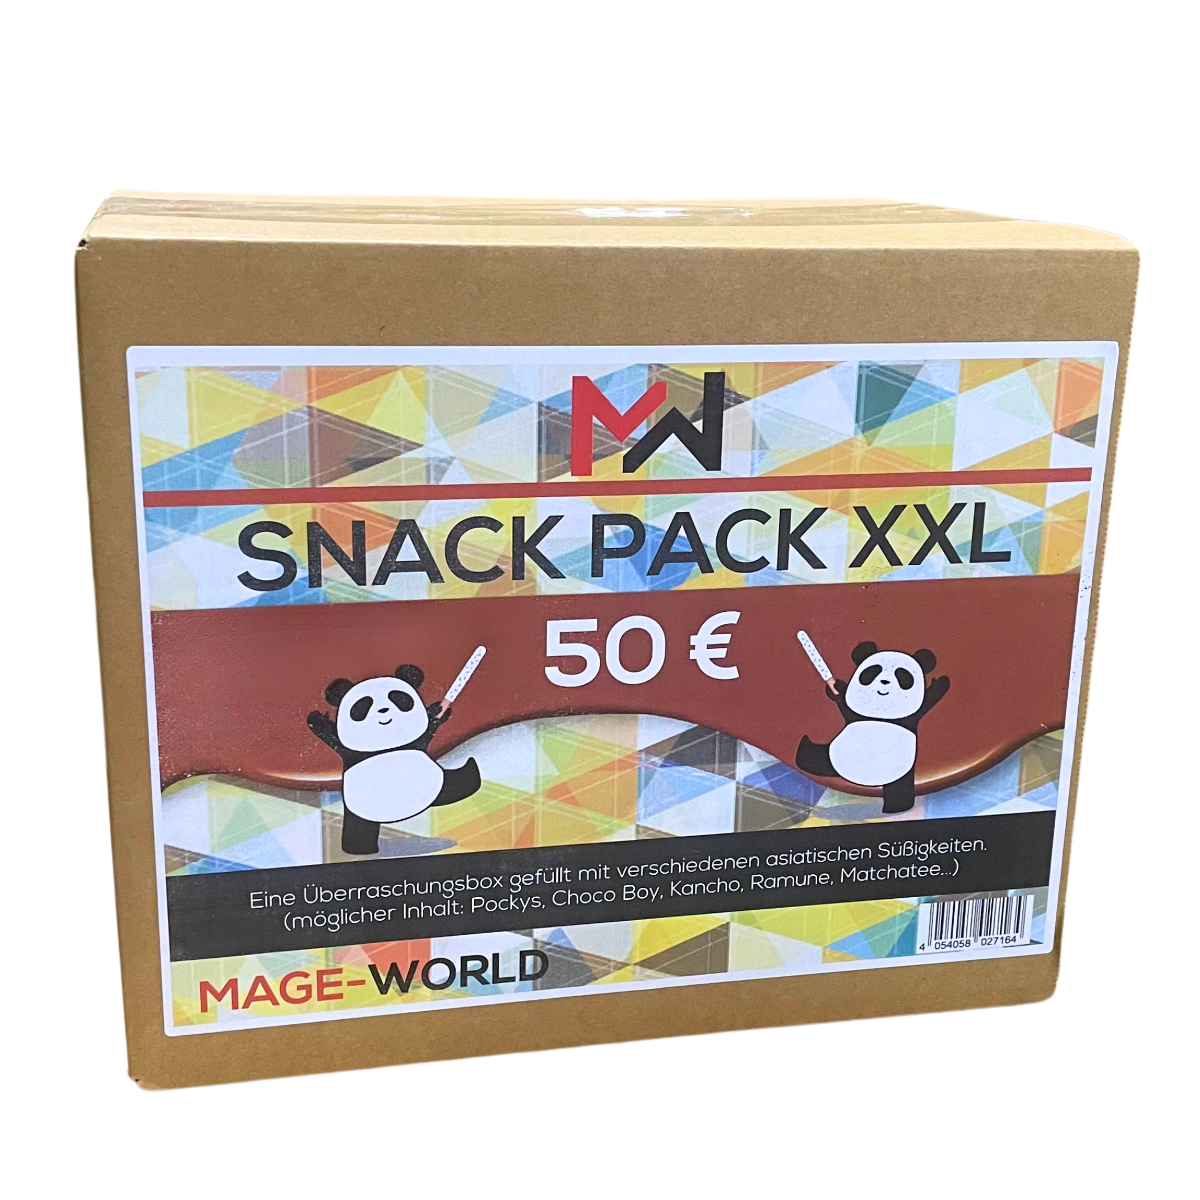 Snack Pack XXL - snack surprise box